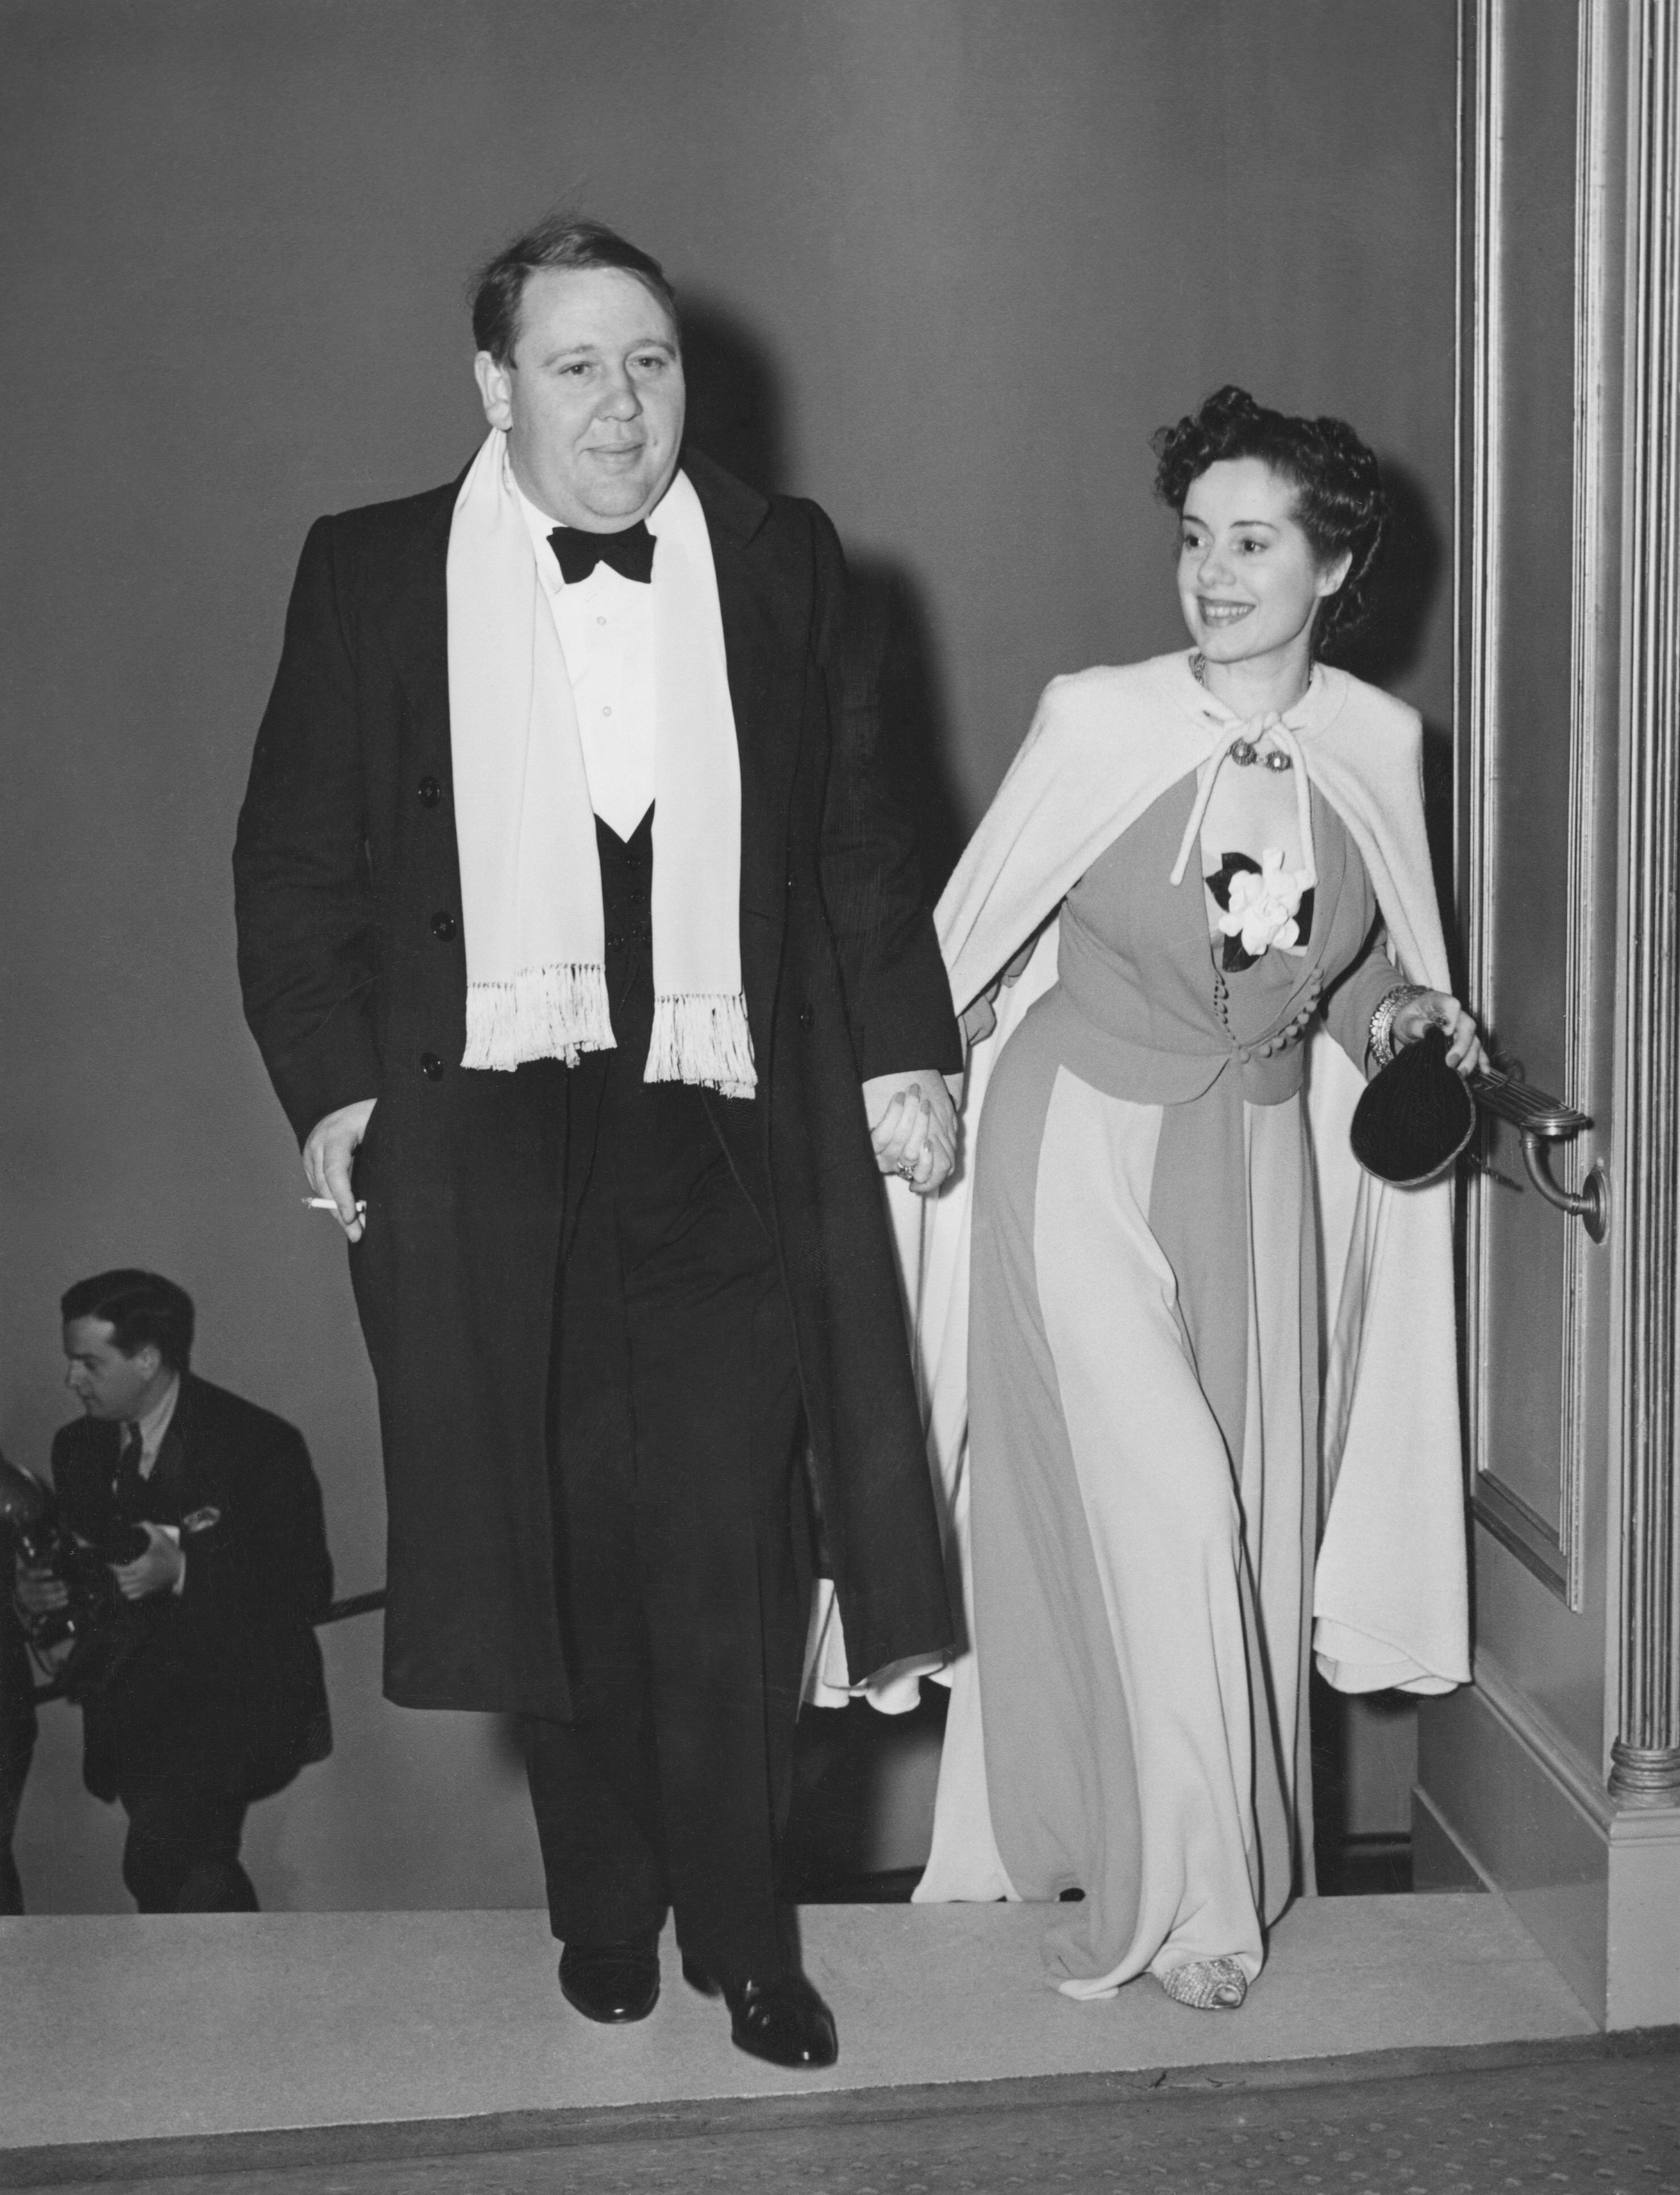 1940 | Oscars.org | Academy of Motion Picture Arts and Sciences